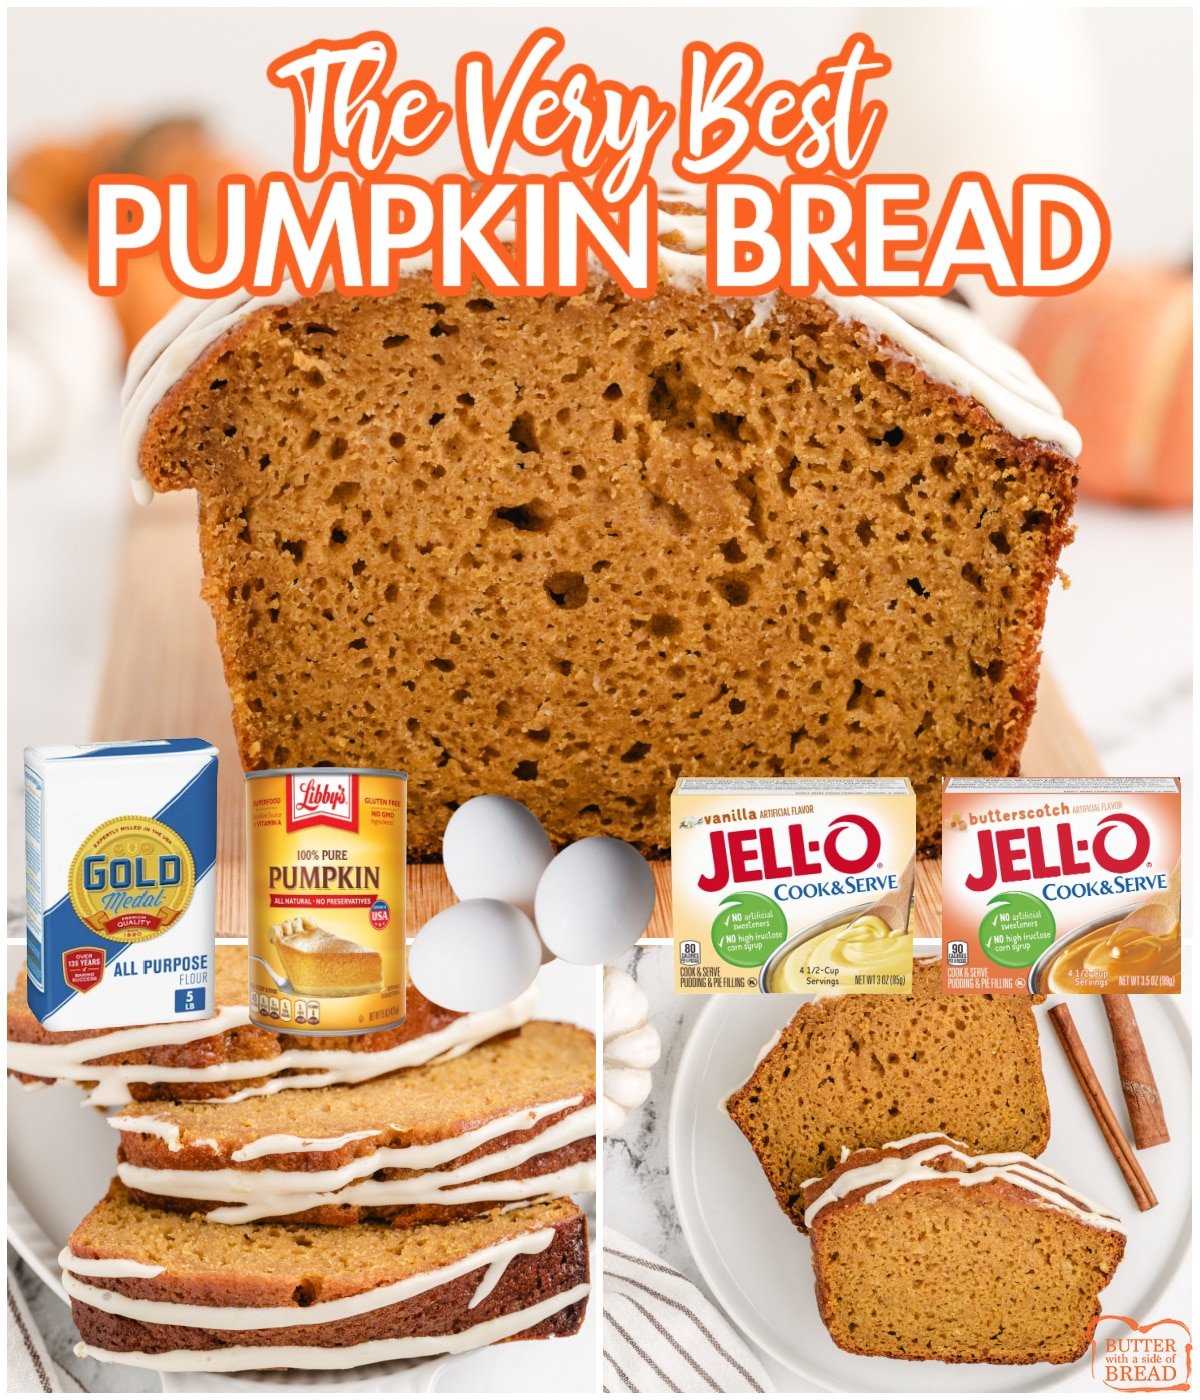 Best Pumpkin Bread that is made with canned pumpkin, vanilla and butterscotch pudding mixes. This deliciously moist pumpkin quick bread recipe is also topped with a delicious cream cheese glaze!